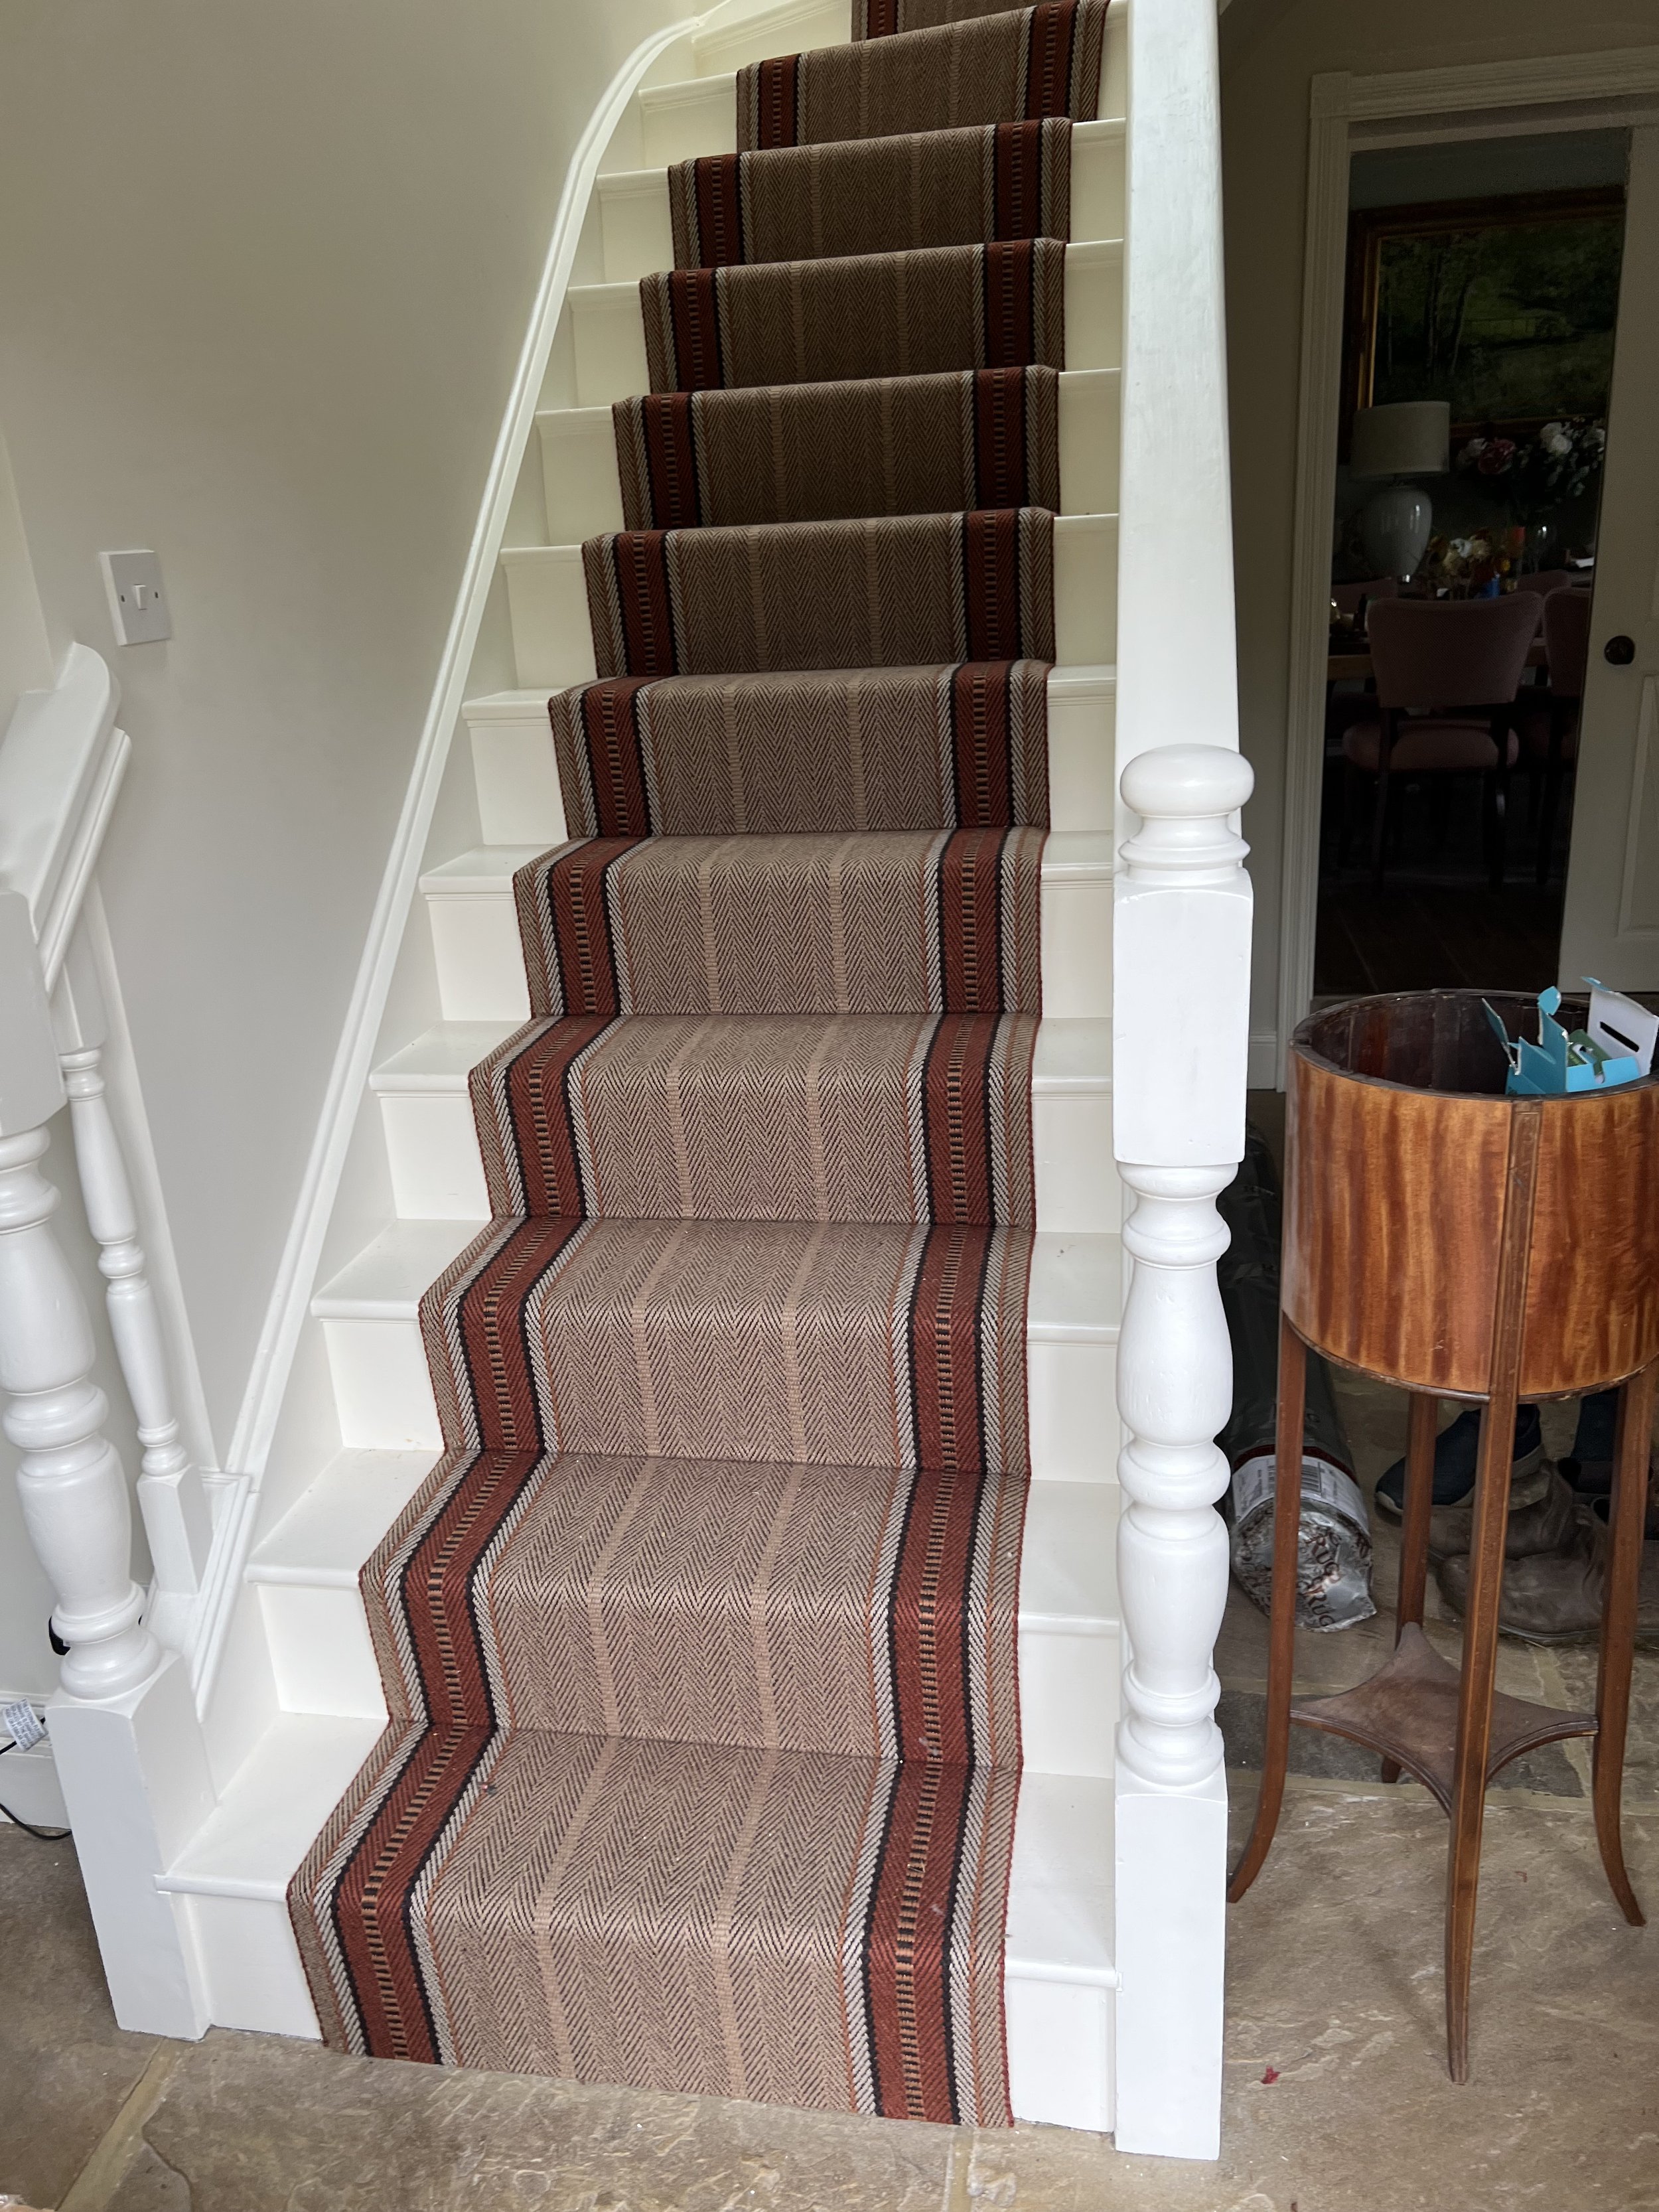 A replacement stair runner to freshen things up